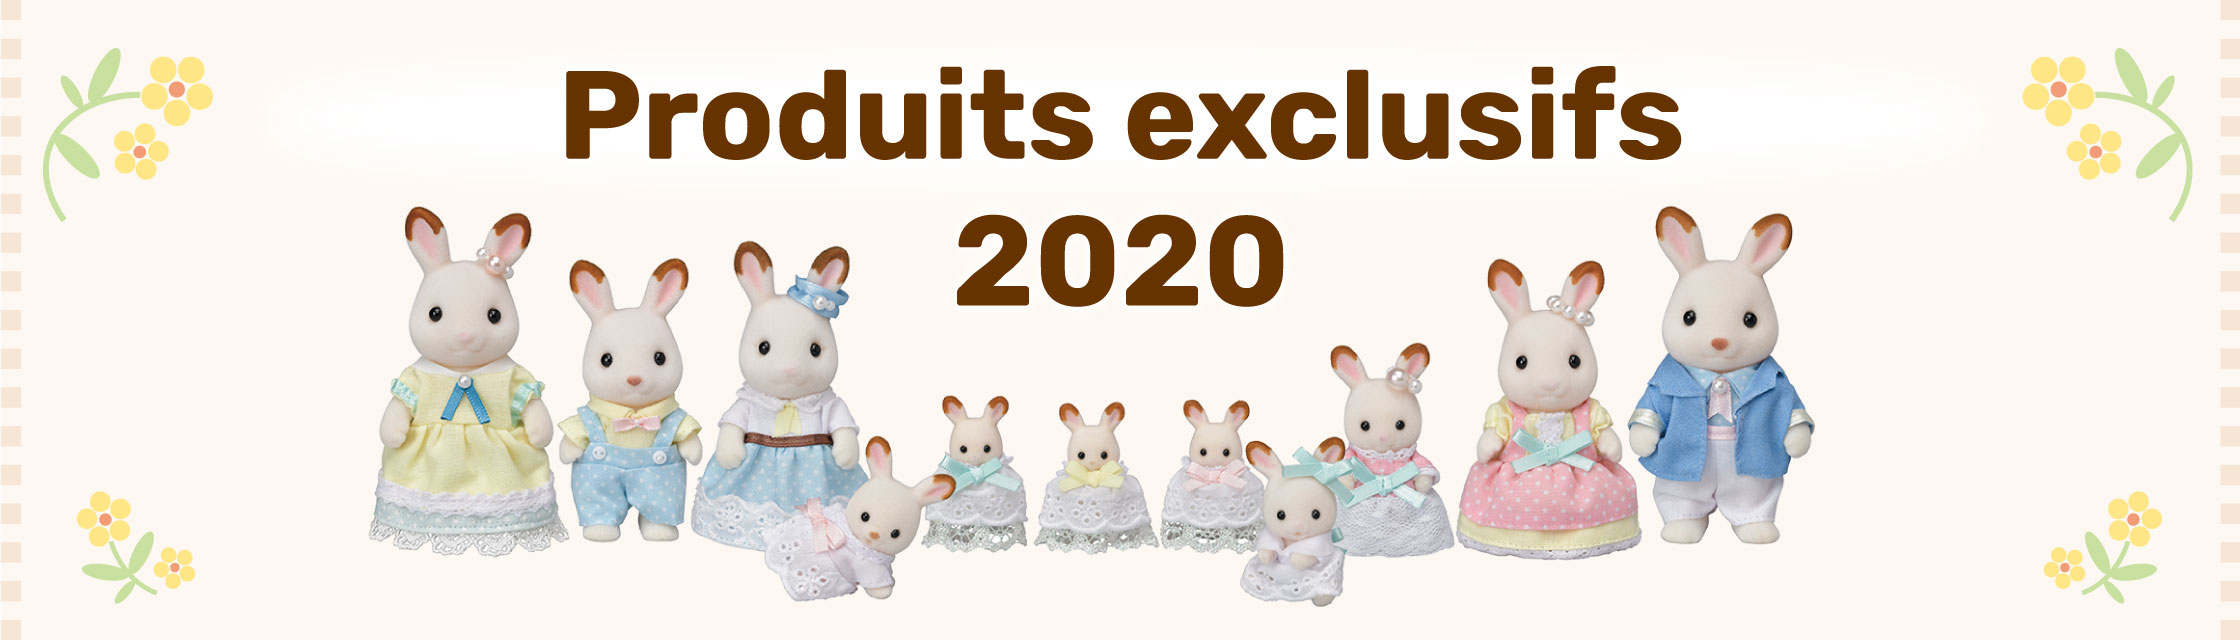 Limited Edition products 2020